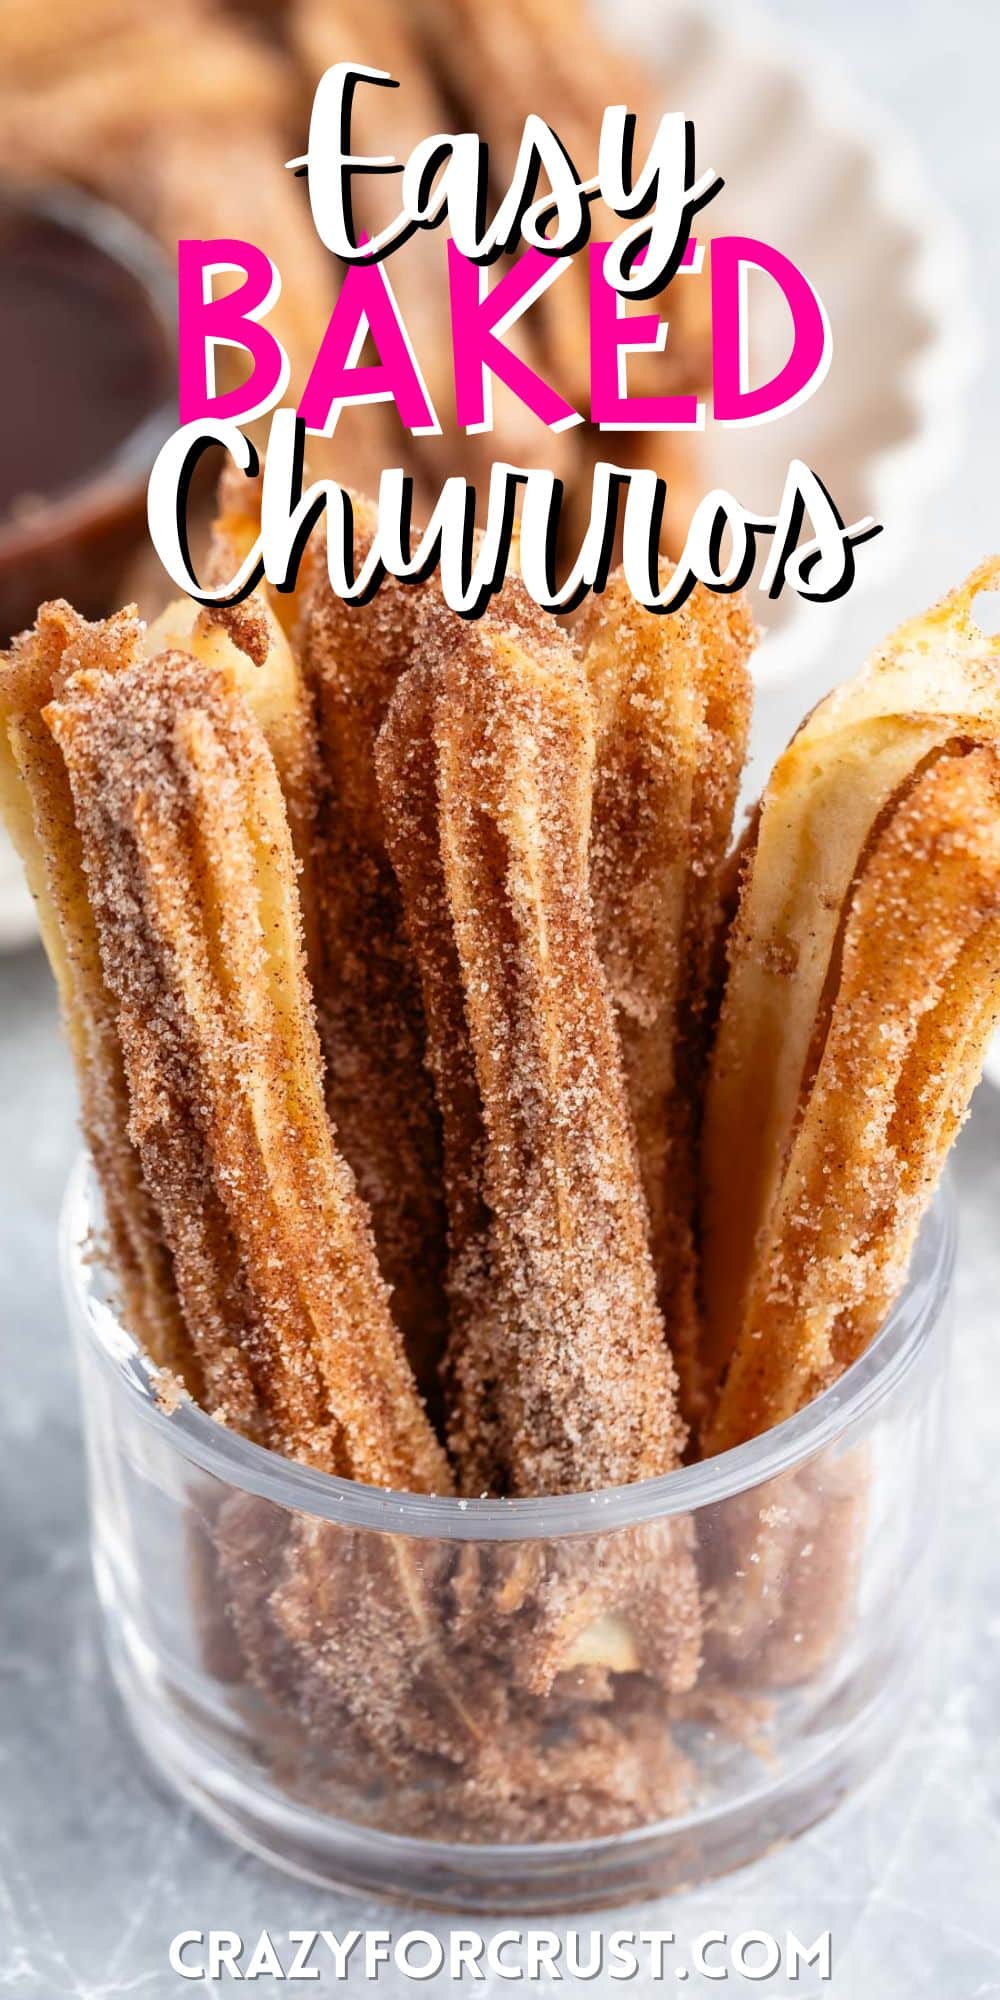 churros propped up together in a clear glass with words on the image.